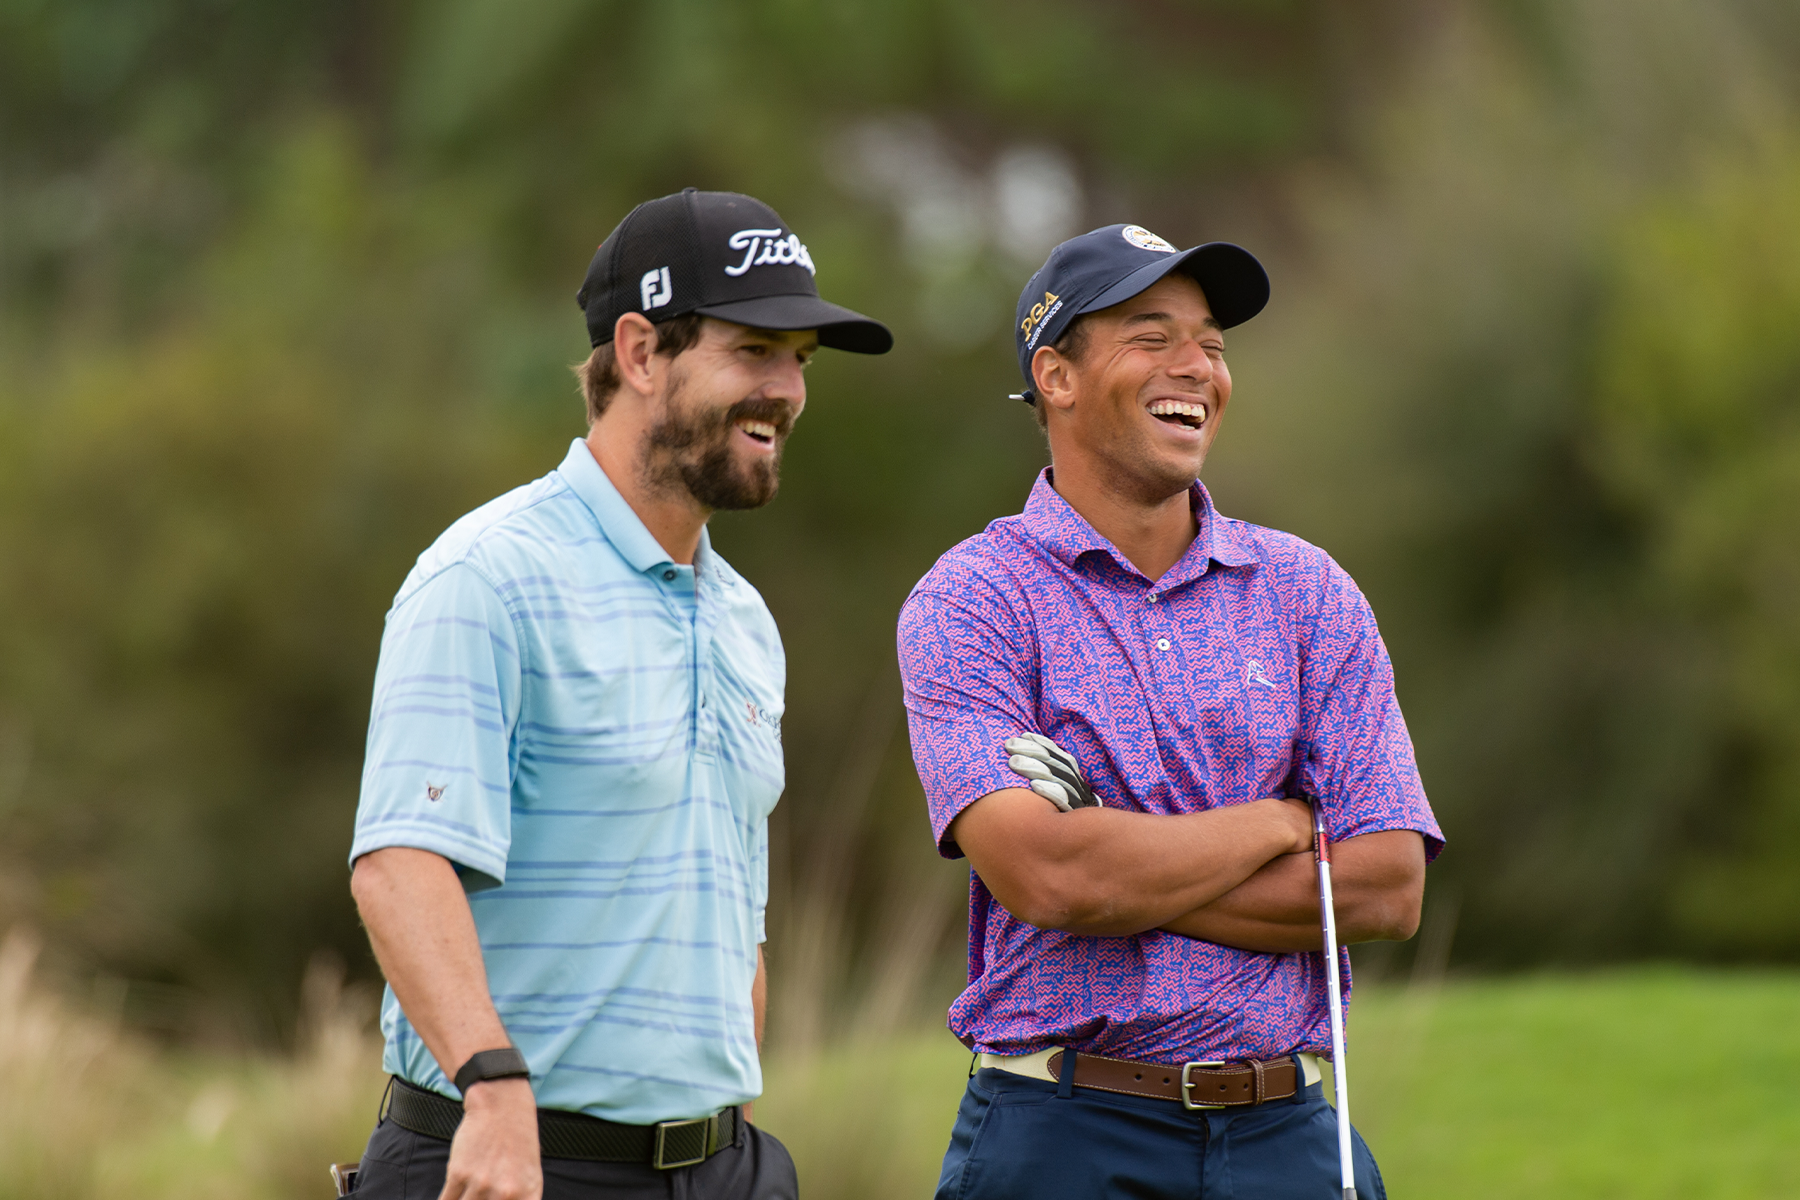 Photo: best golf bets with friends